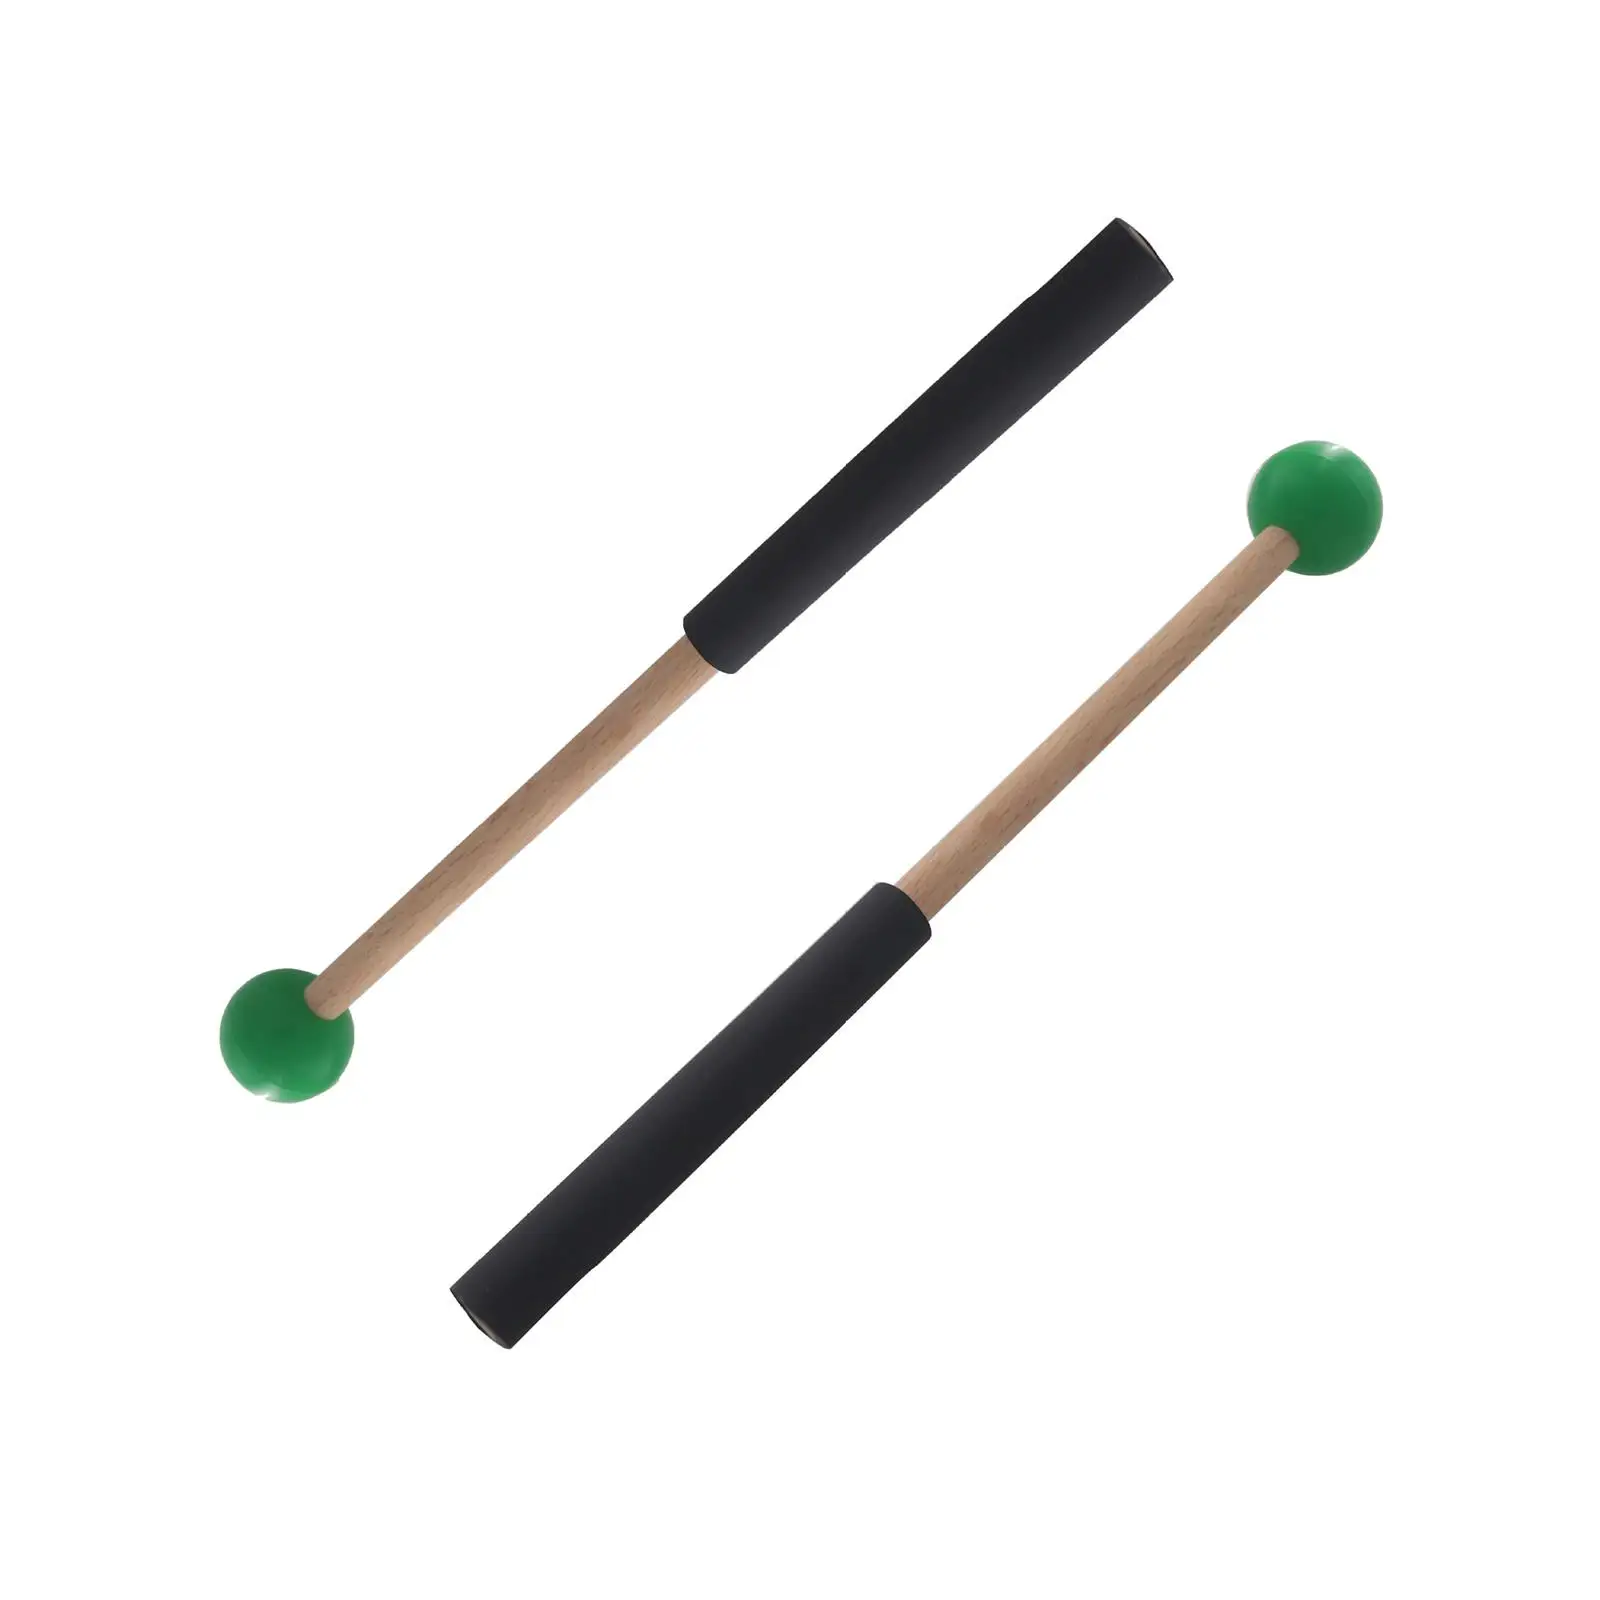 2x Wood Percussion Sticks Musical Drumstick Portable for Stage Performance